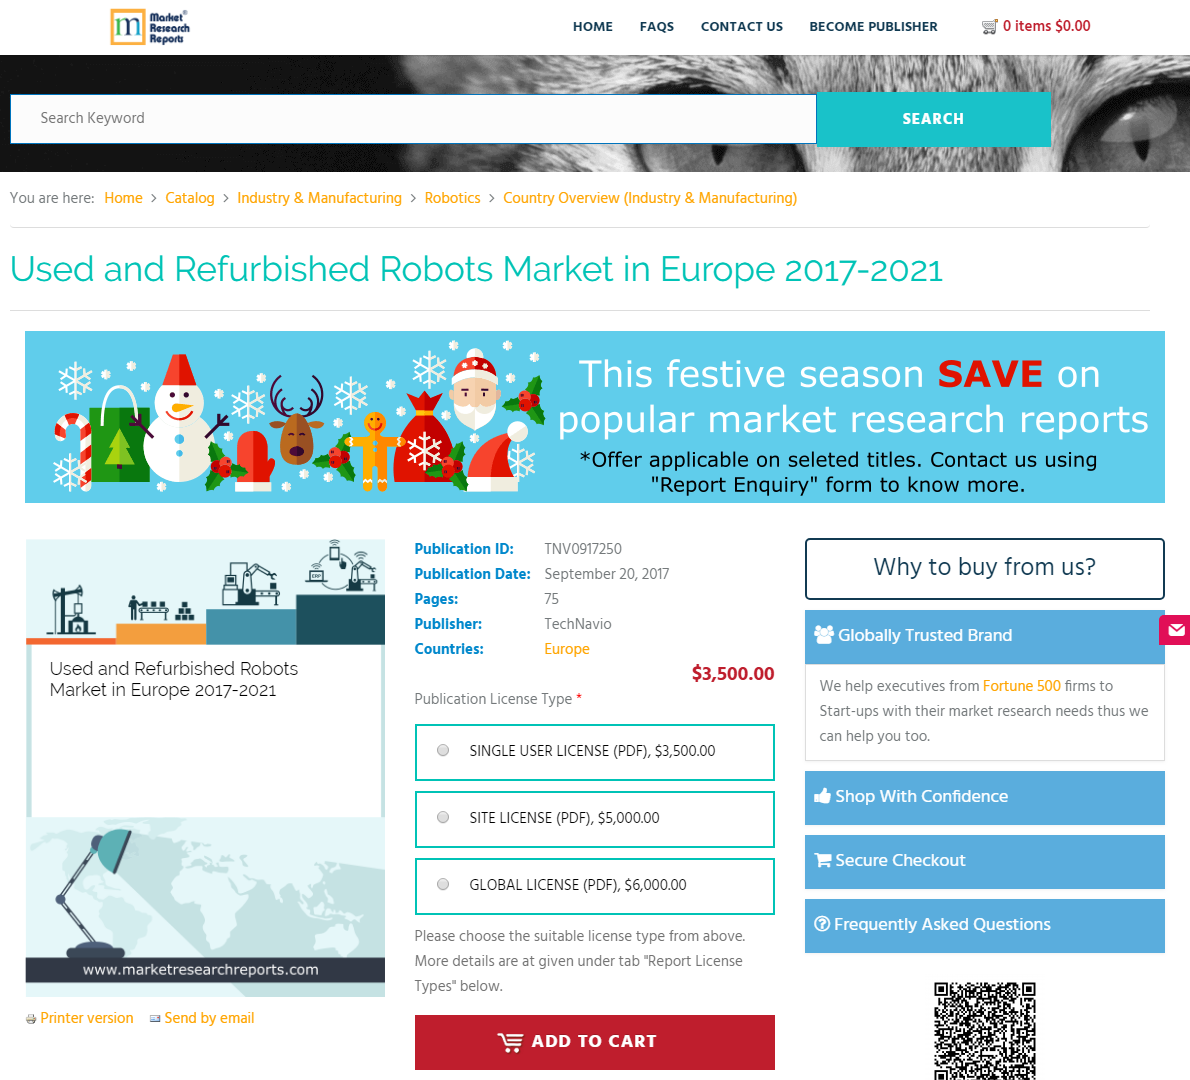 Used and Refurbished Robots Market in Europe 2017 - 2021